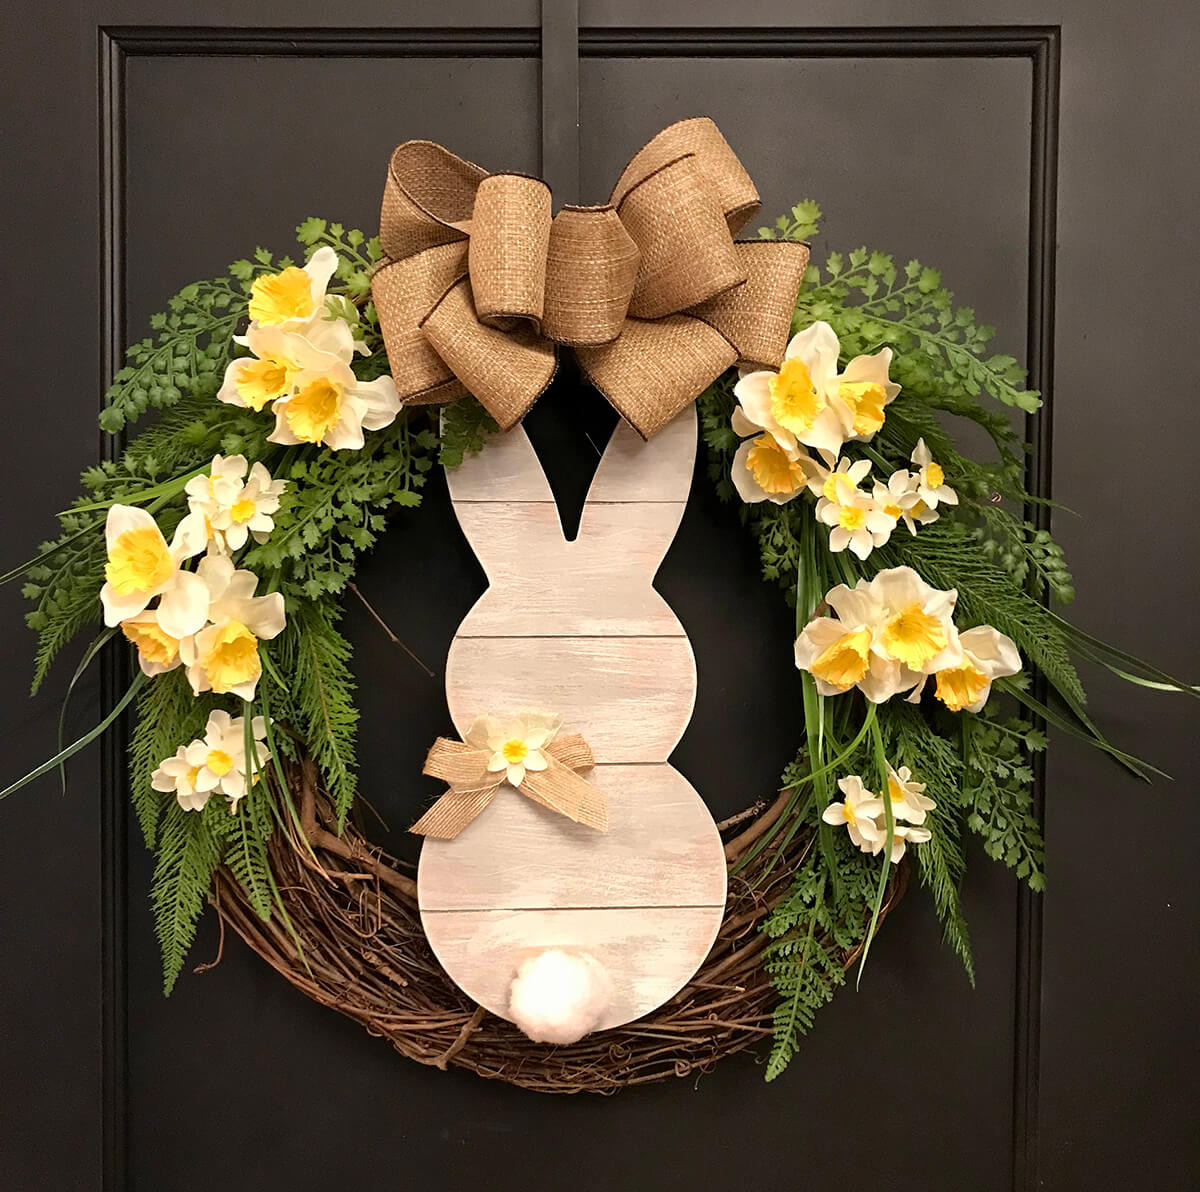 Spring Ideas Rustic
 32 Best Rustic Easter and Spring Decoration Ideas for 2020